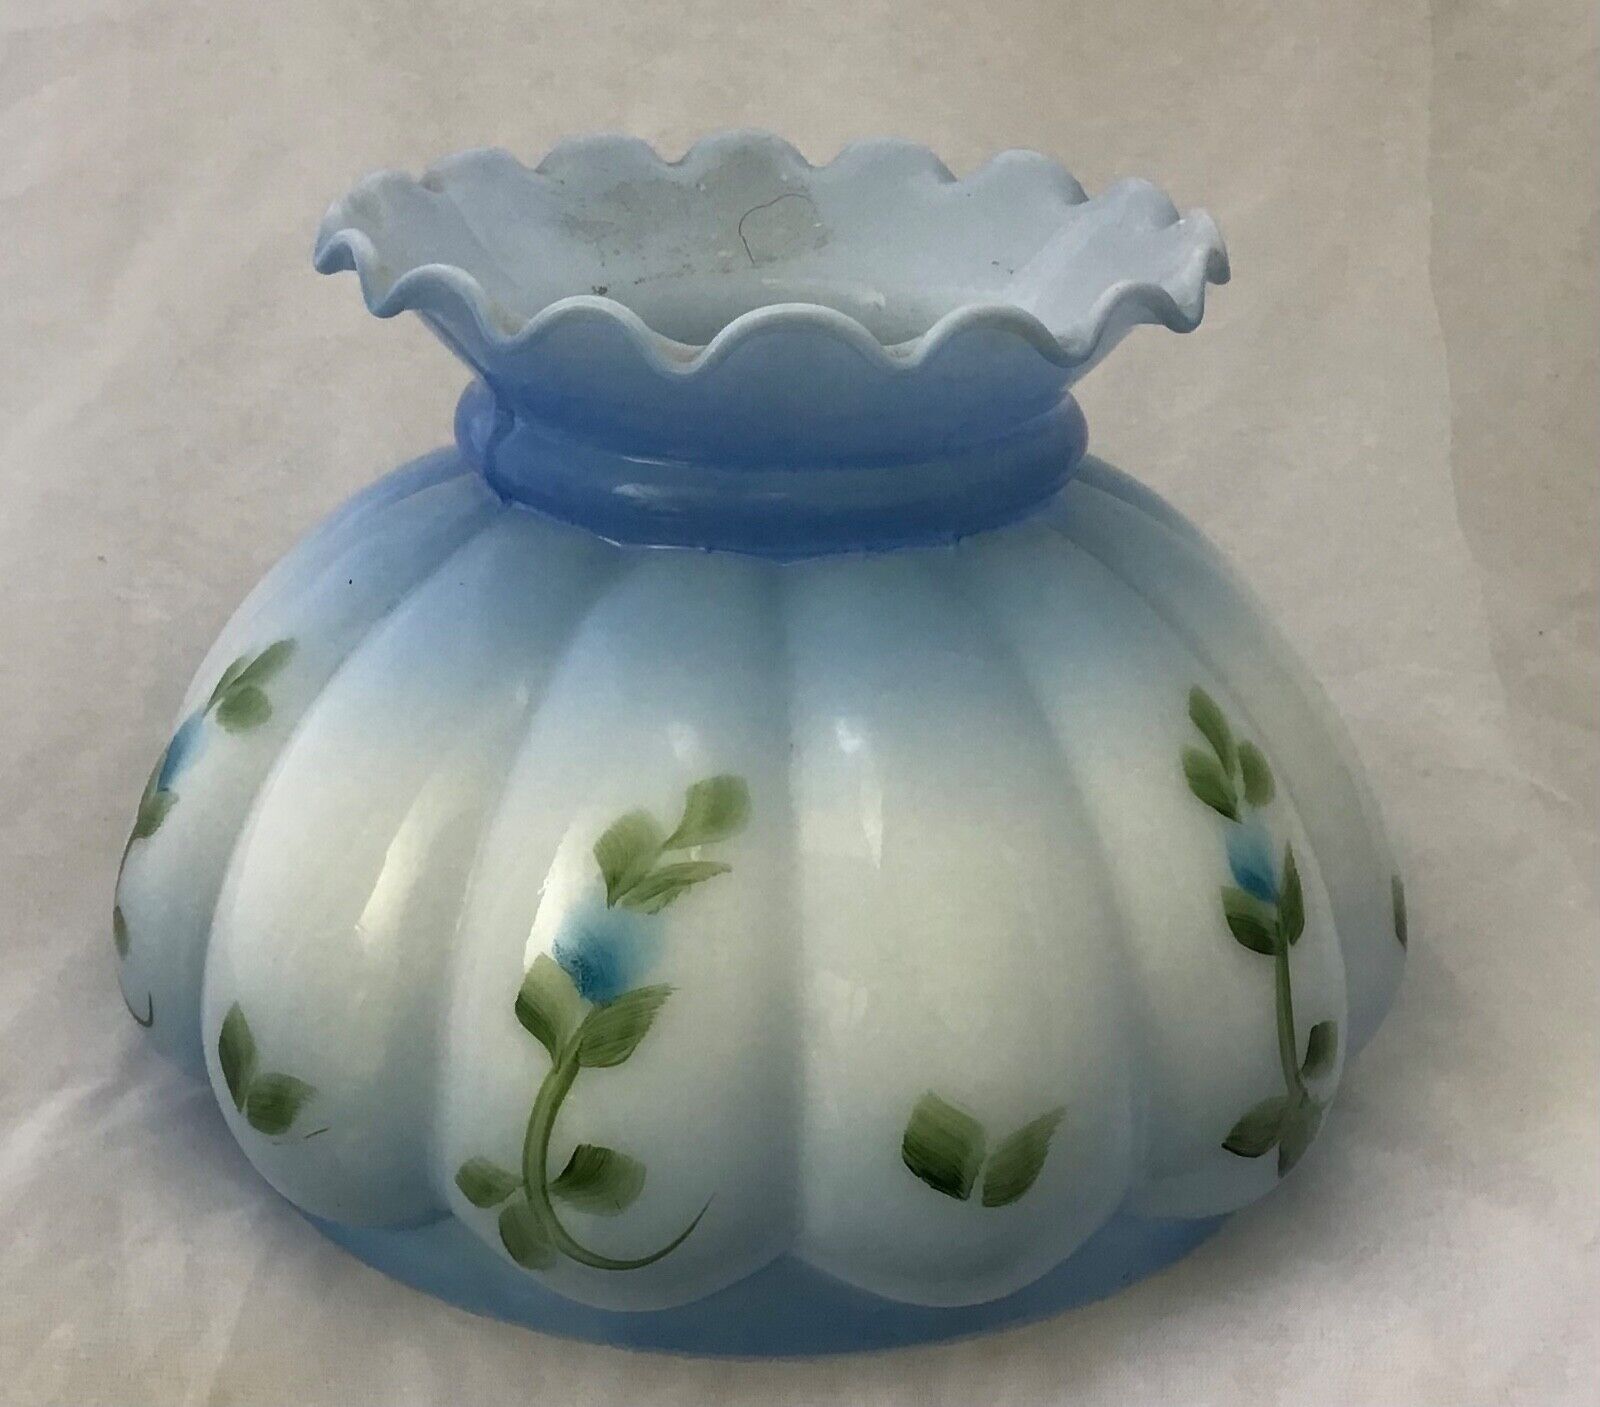 Ribbed 7” Melon Student Blue Tint Floral Decor Pattern Milk Glass Lamp Shade